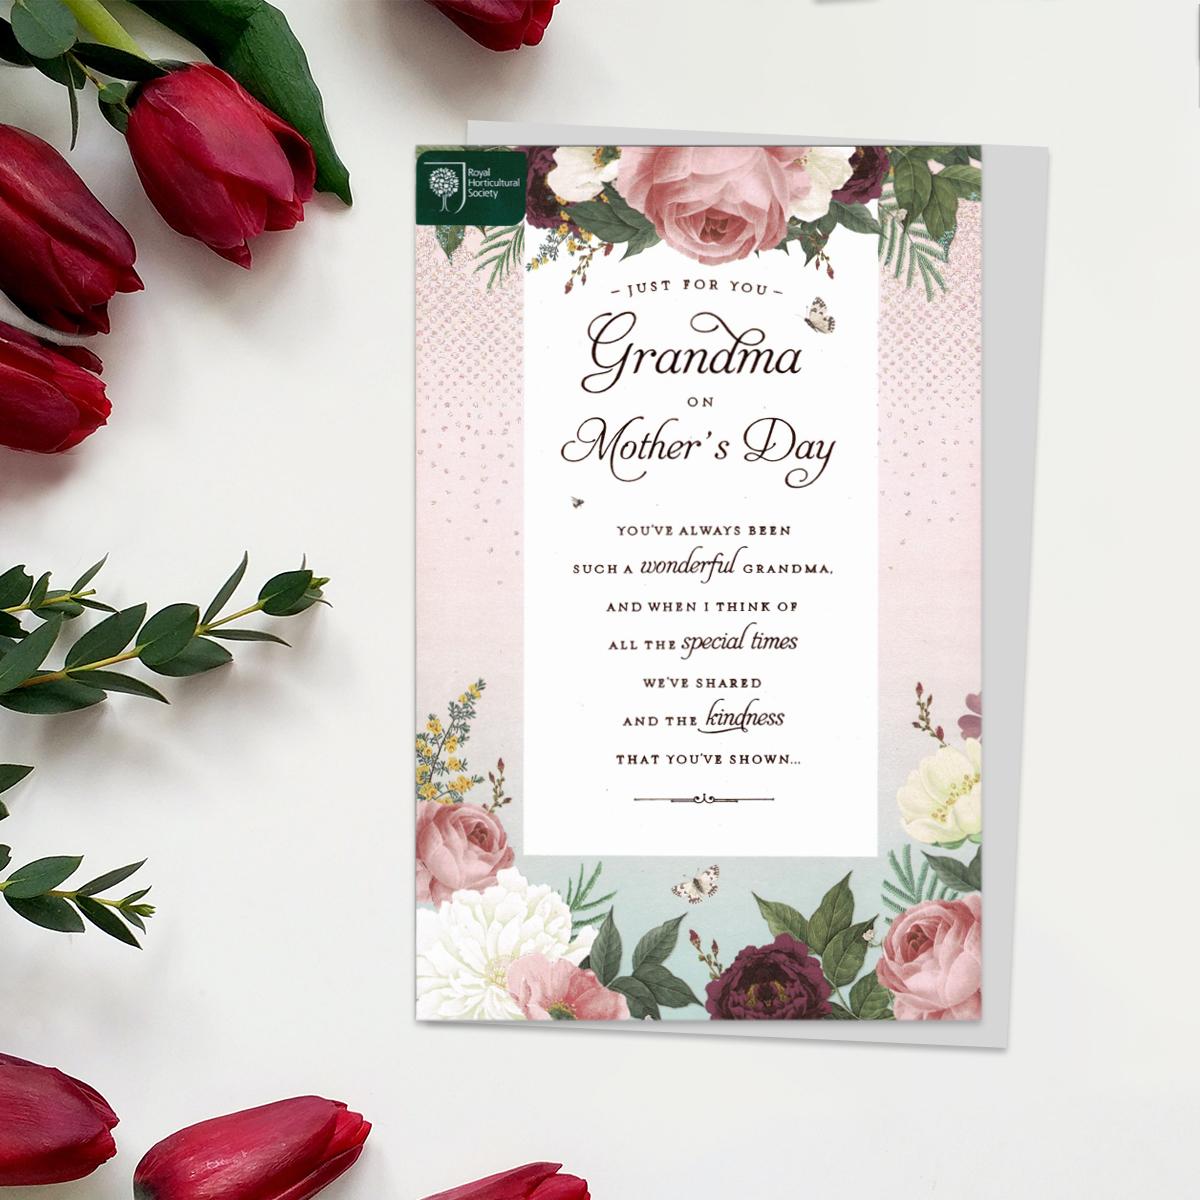 RHS ' Just for You Grandma On Mother's Day' Card Featuring Beautiful Roses And added Sparkle. Complete With Grey Envelope With floral detail